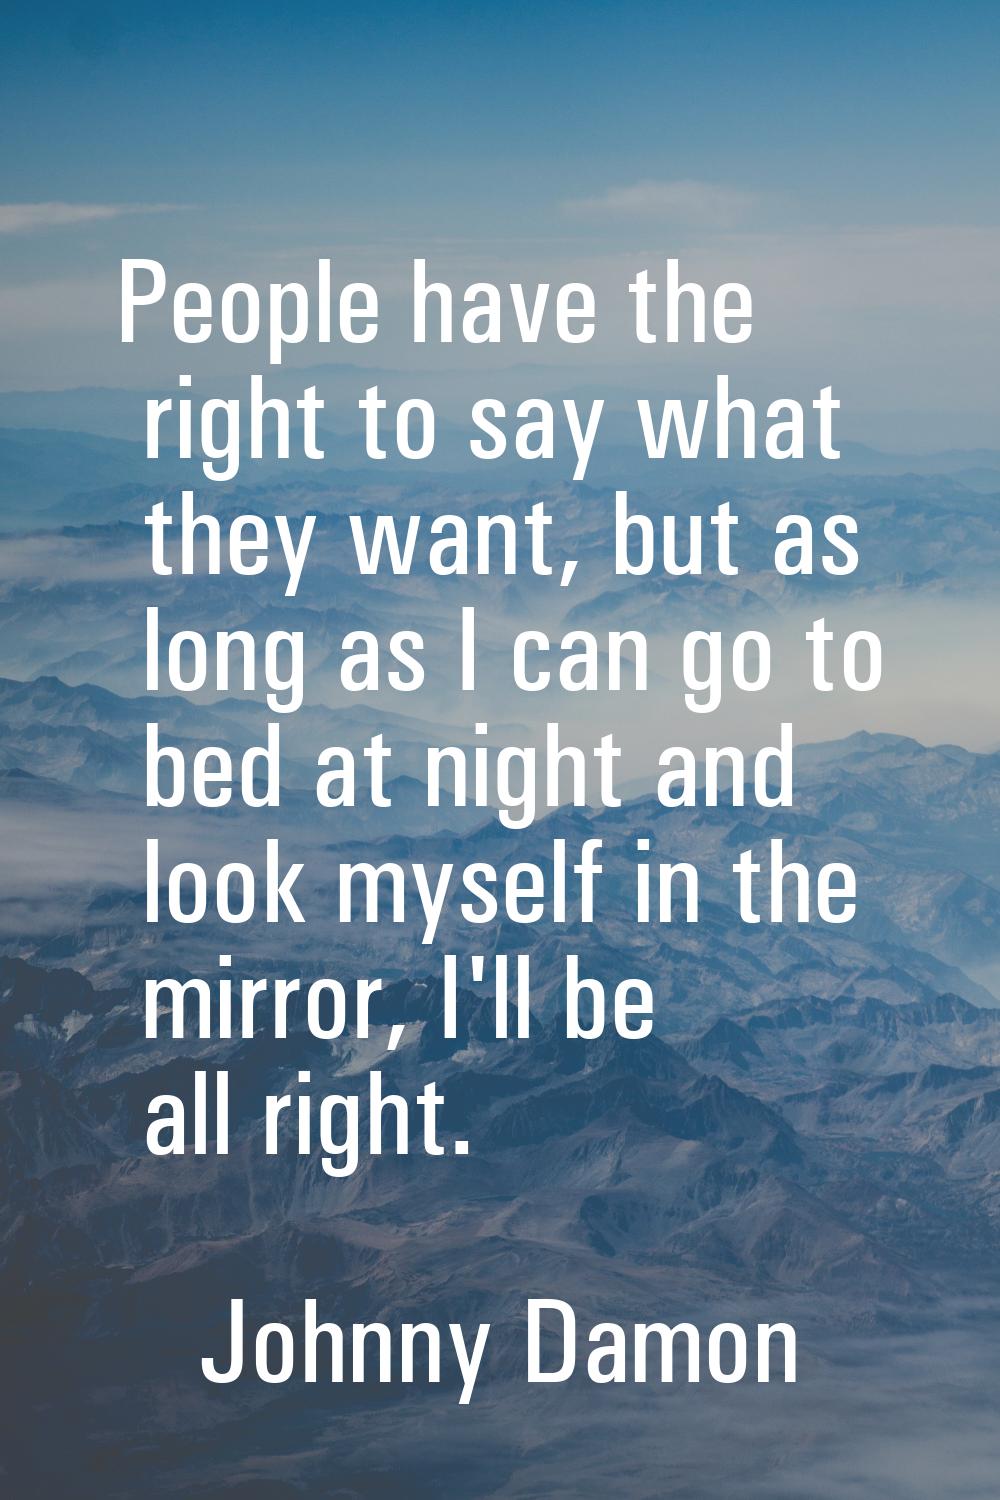 People have the right to say what they want, but as long as I can go to bed at night and look mysel